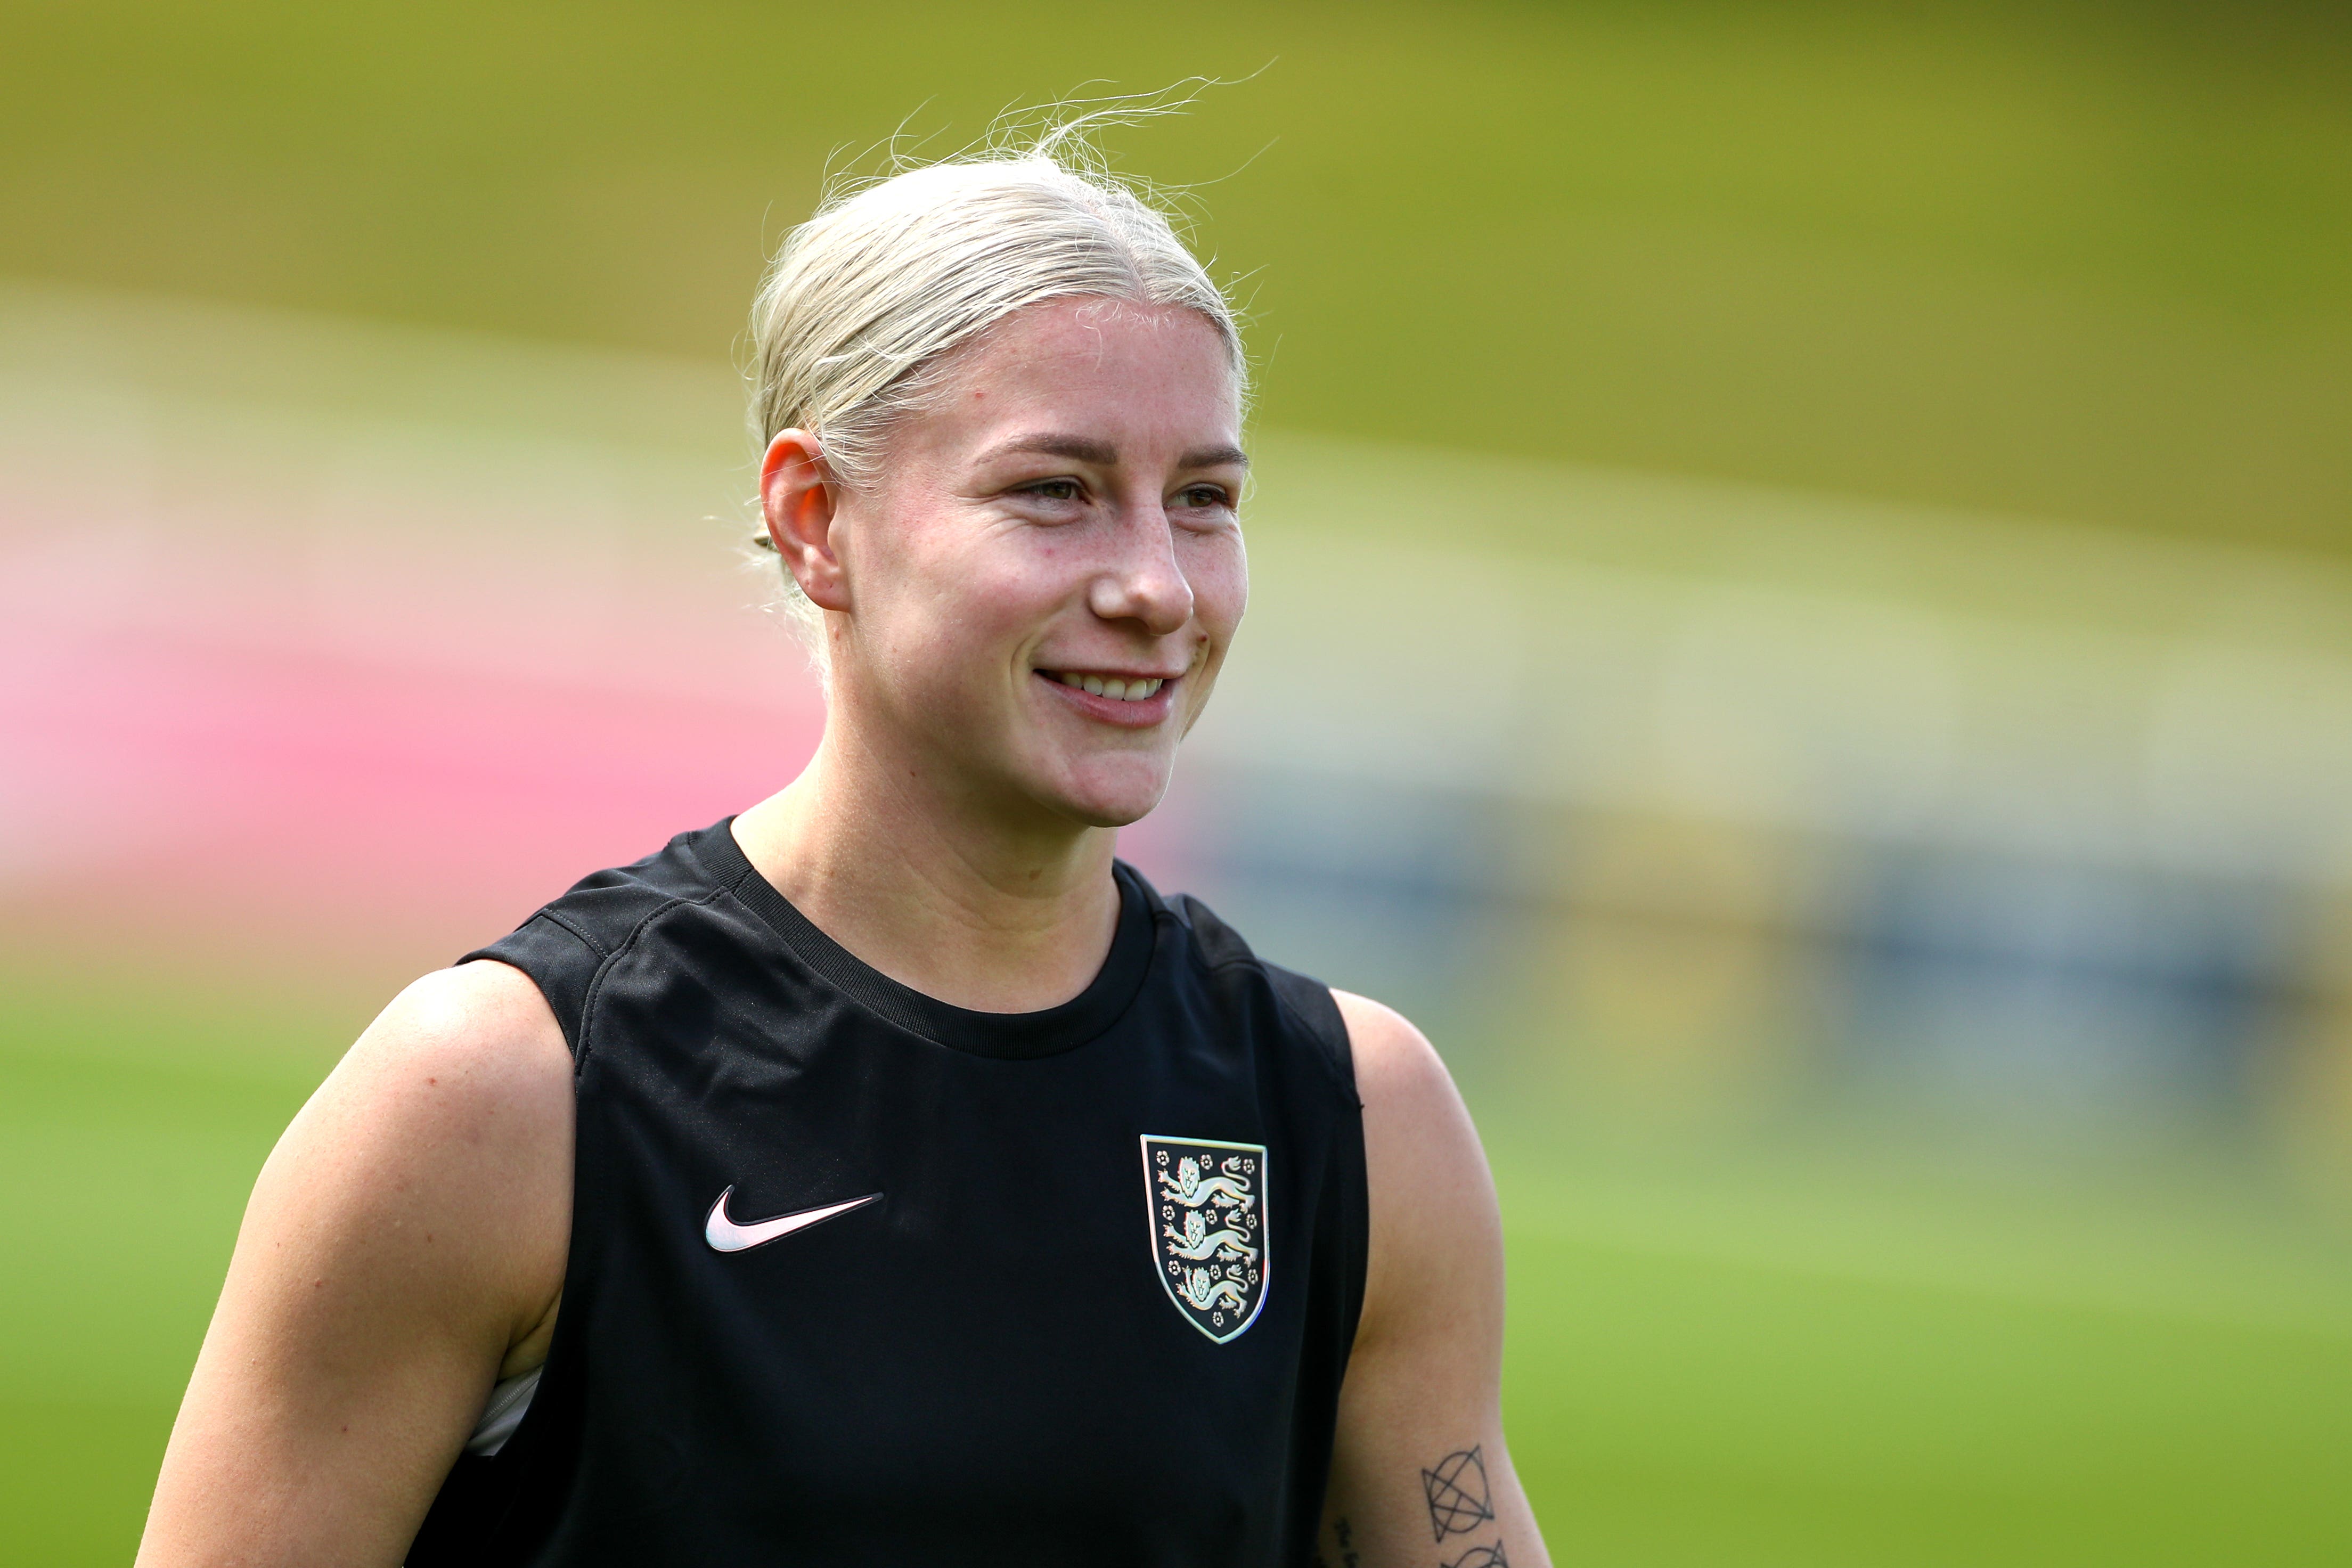 The Lionesses forward joined Spurs earlier this month from Chelsea